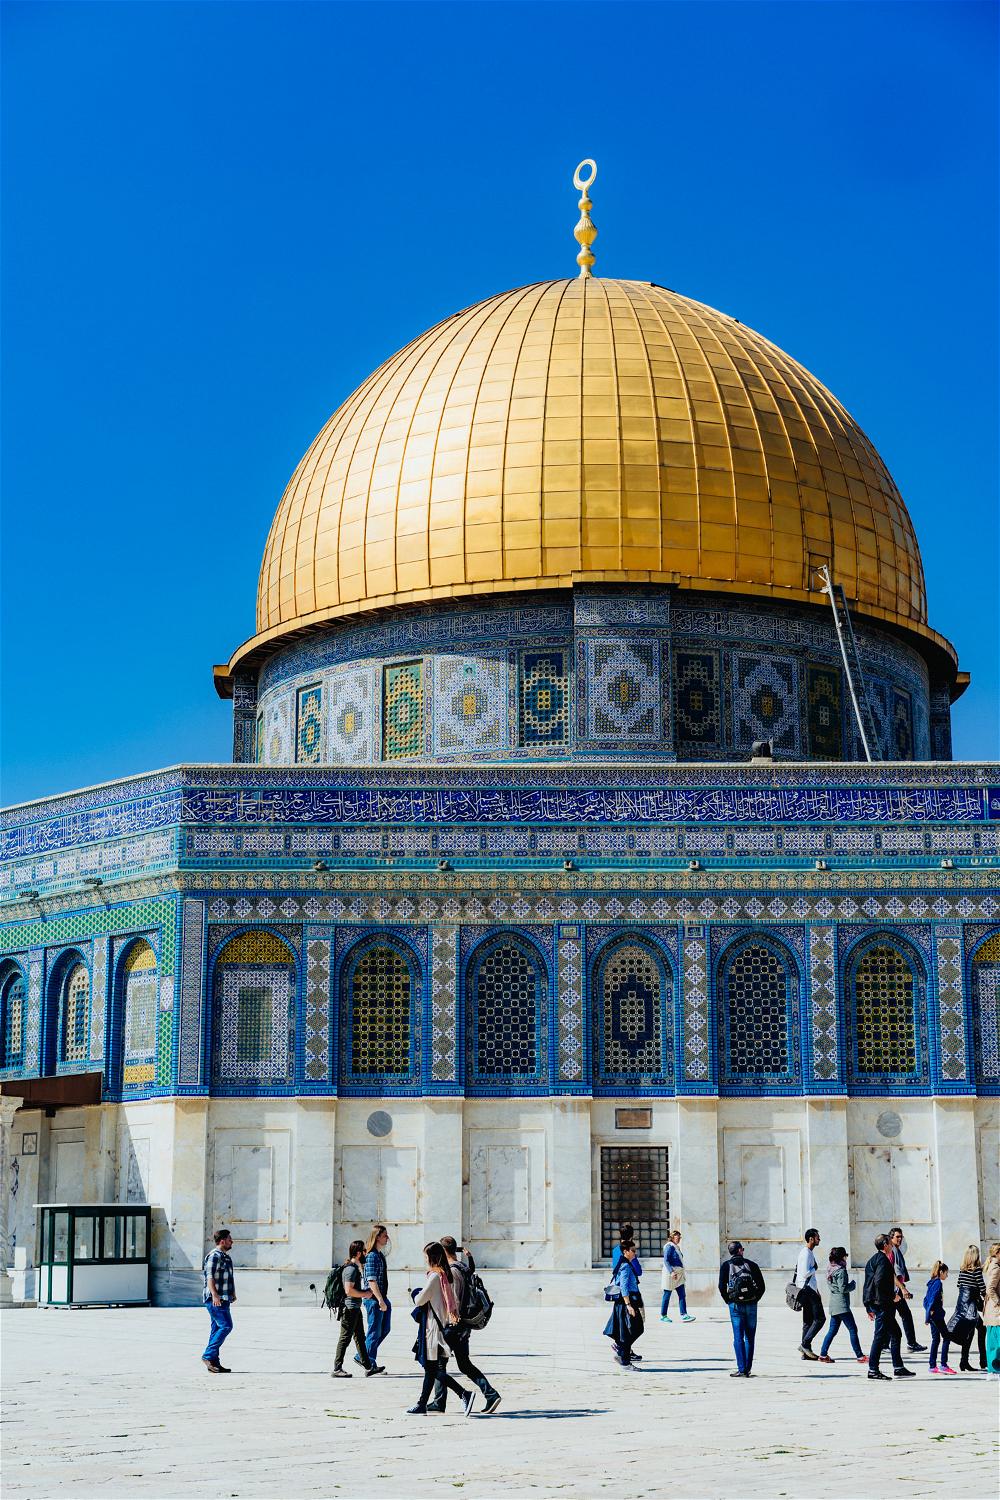 How to visit the Dome of the Rock as a tourist in Jerusalem Israel